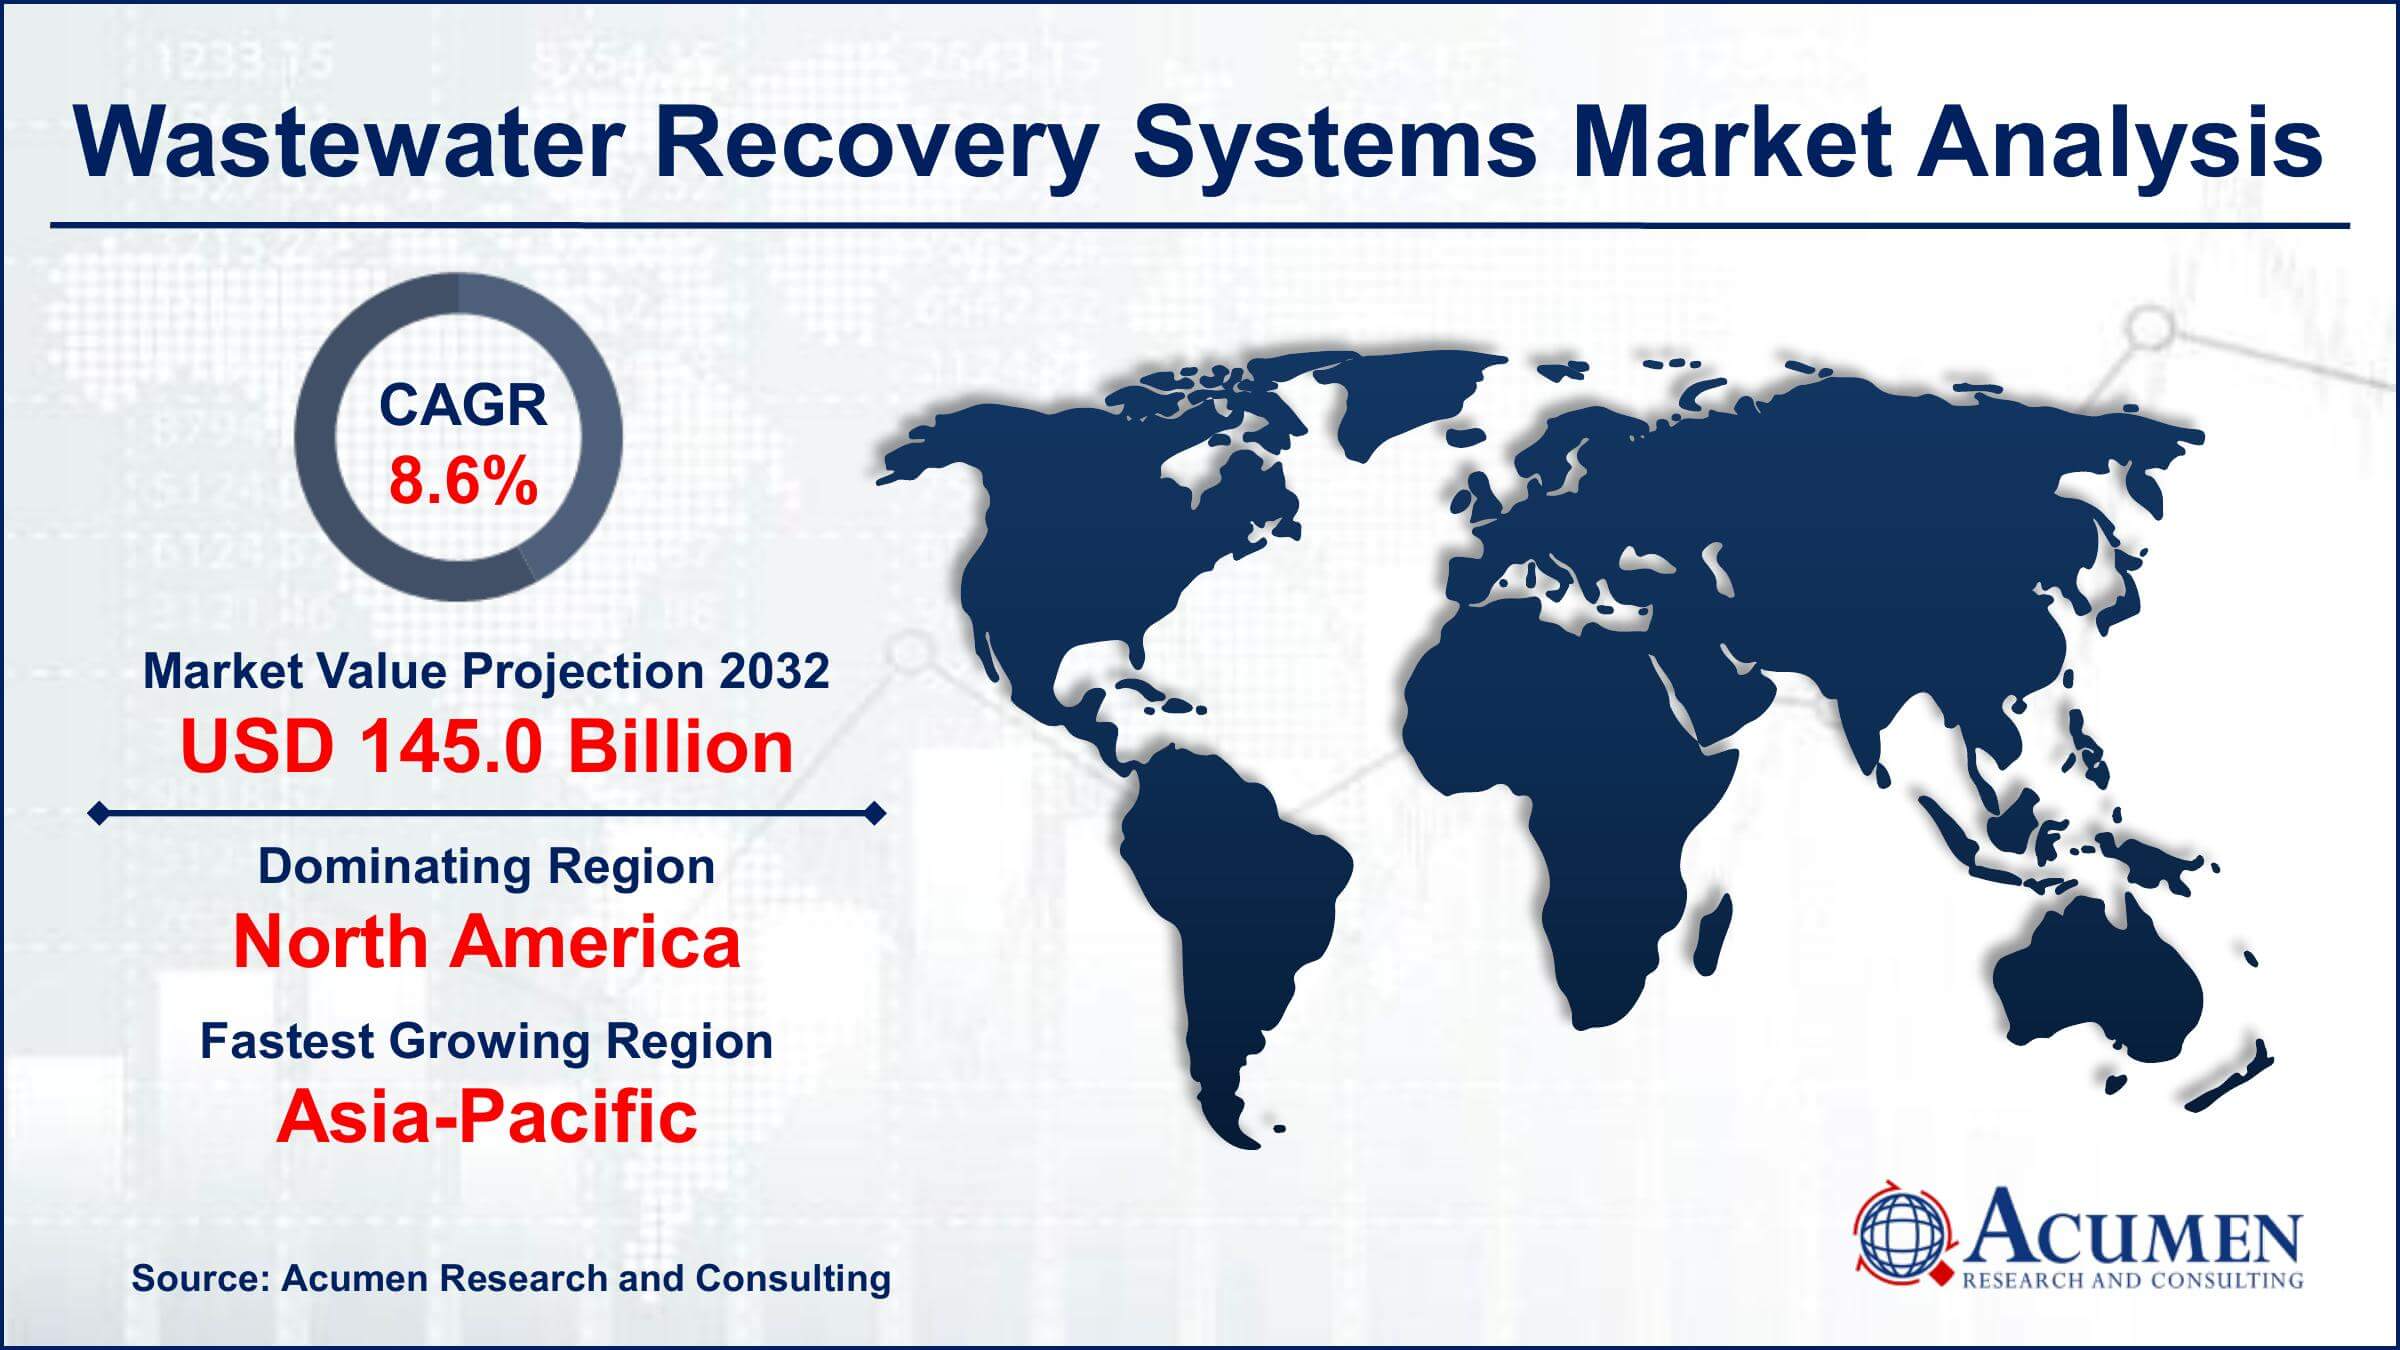 Global Wastewater Recovery Systems Market Trends